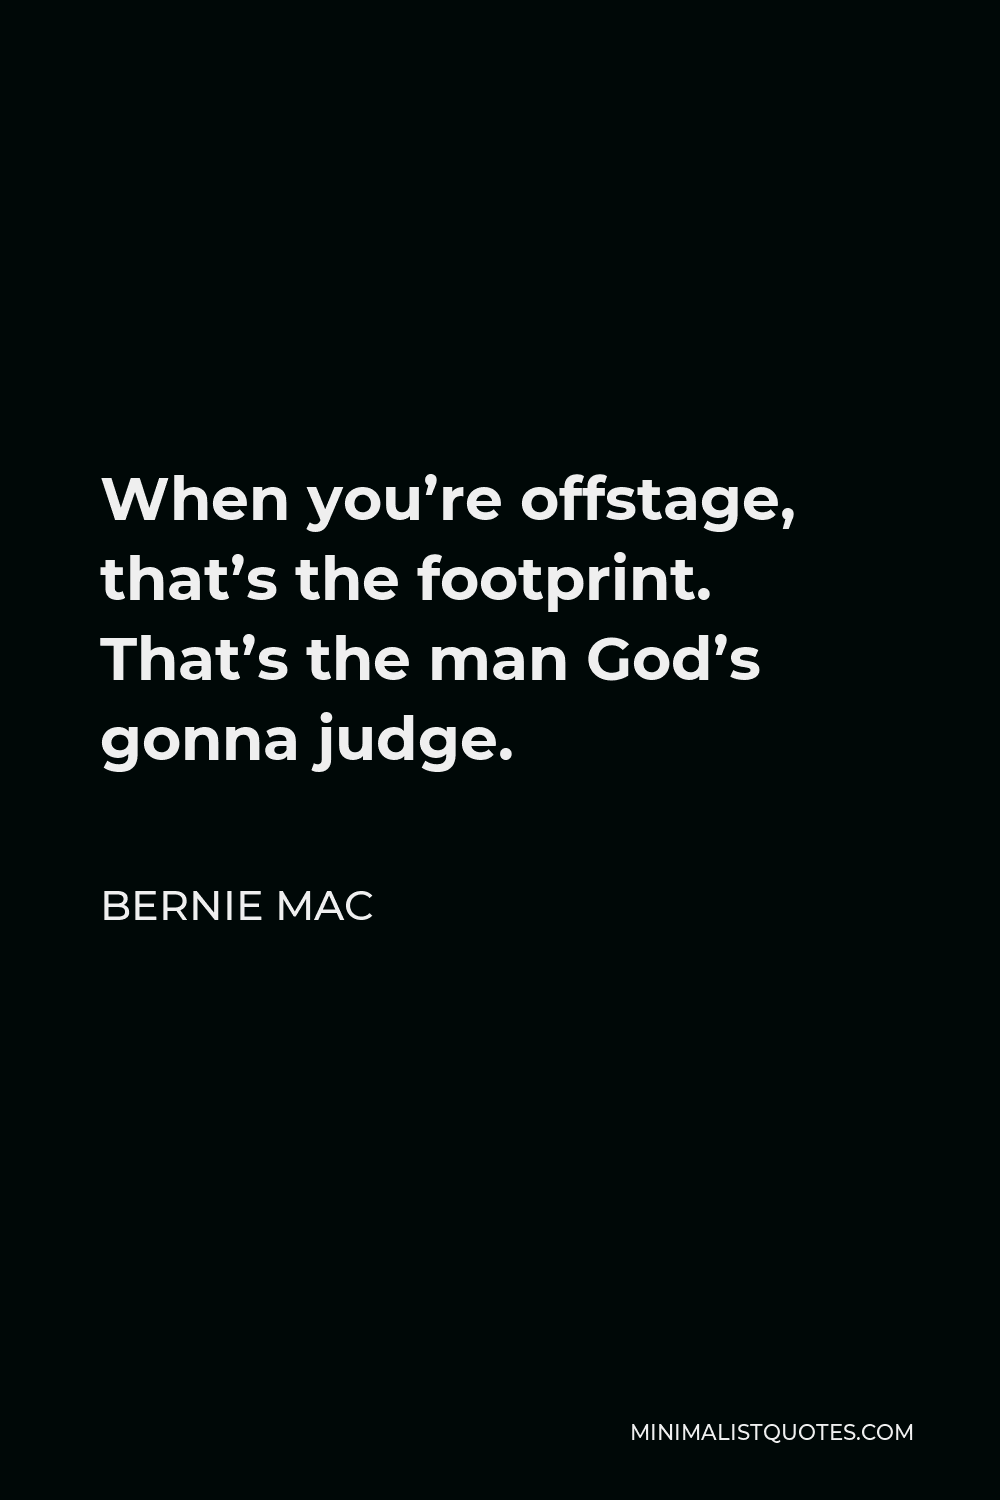 Bernie Mac Quote - When you’re offstage, that’s the footprint. That’s the man God’s gonna judge.